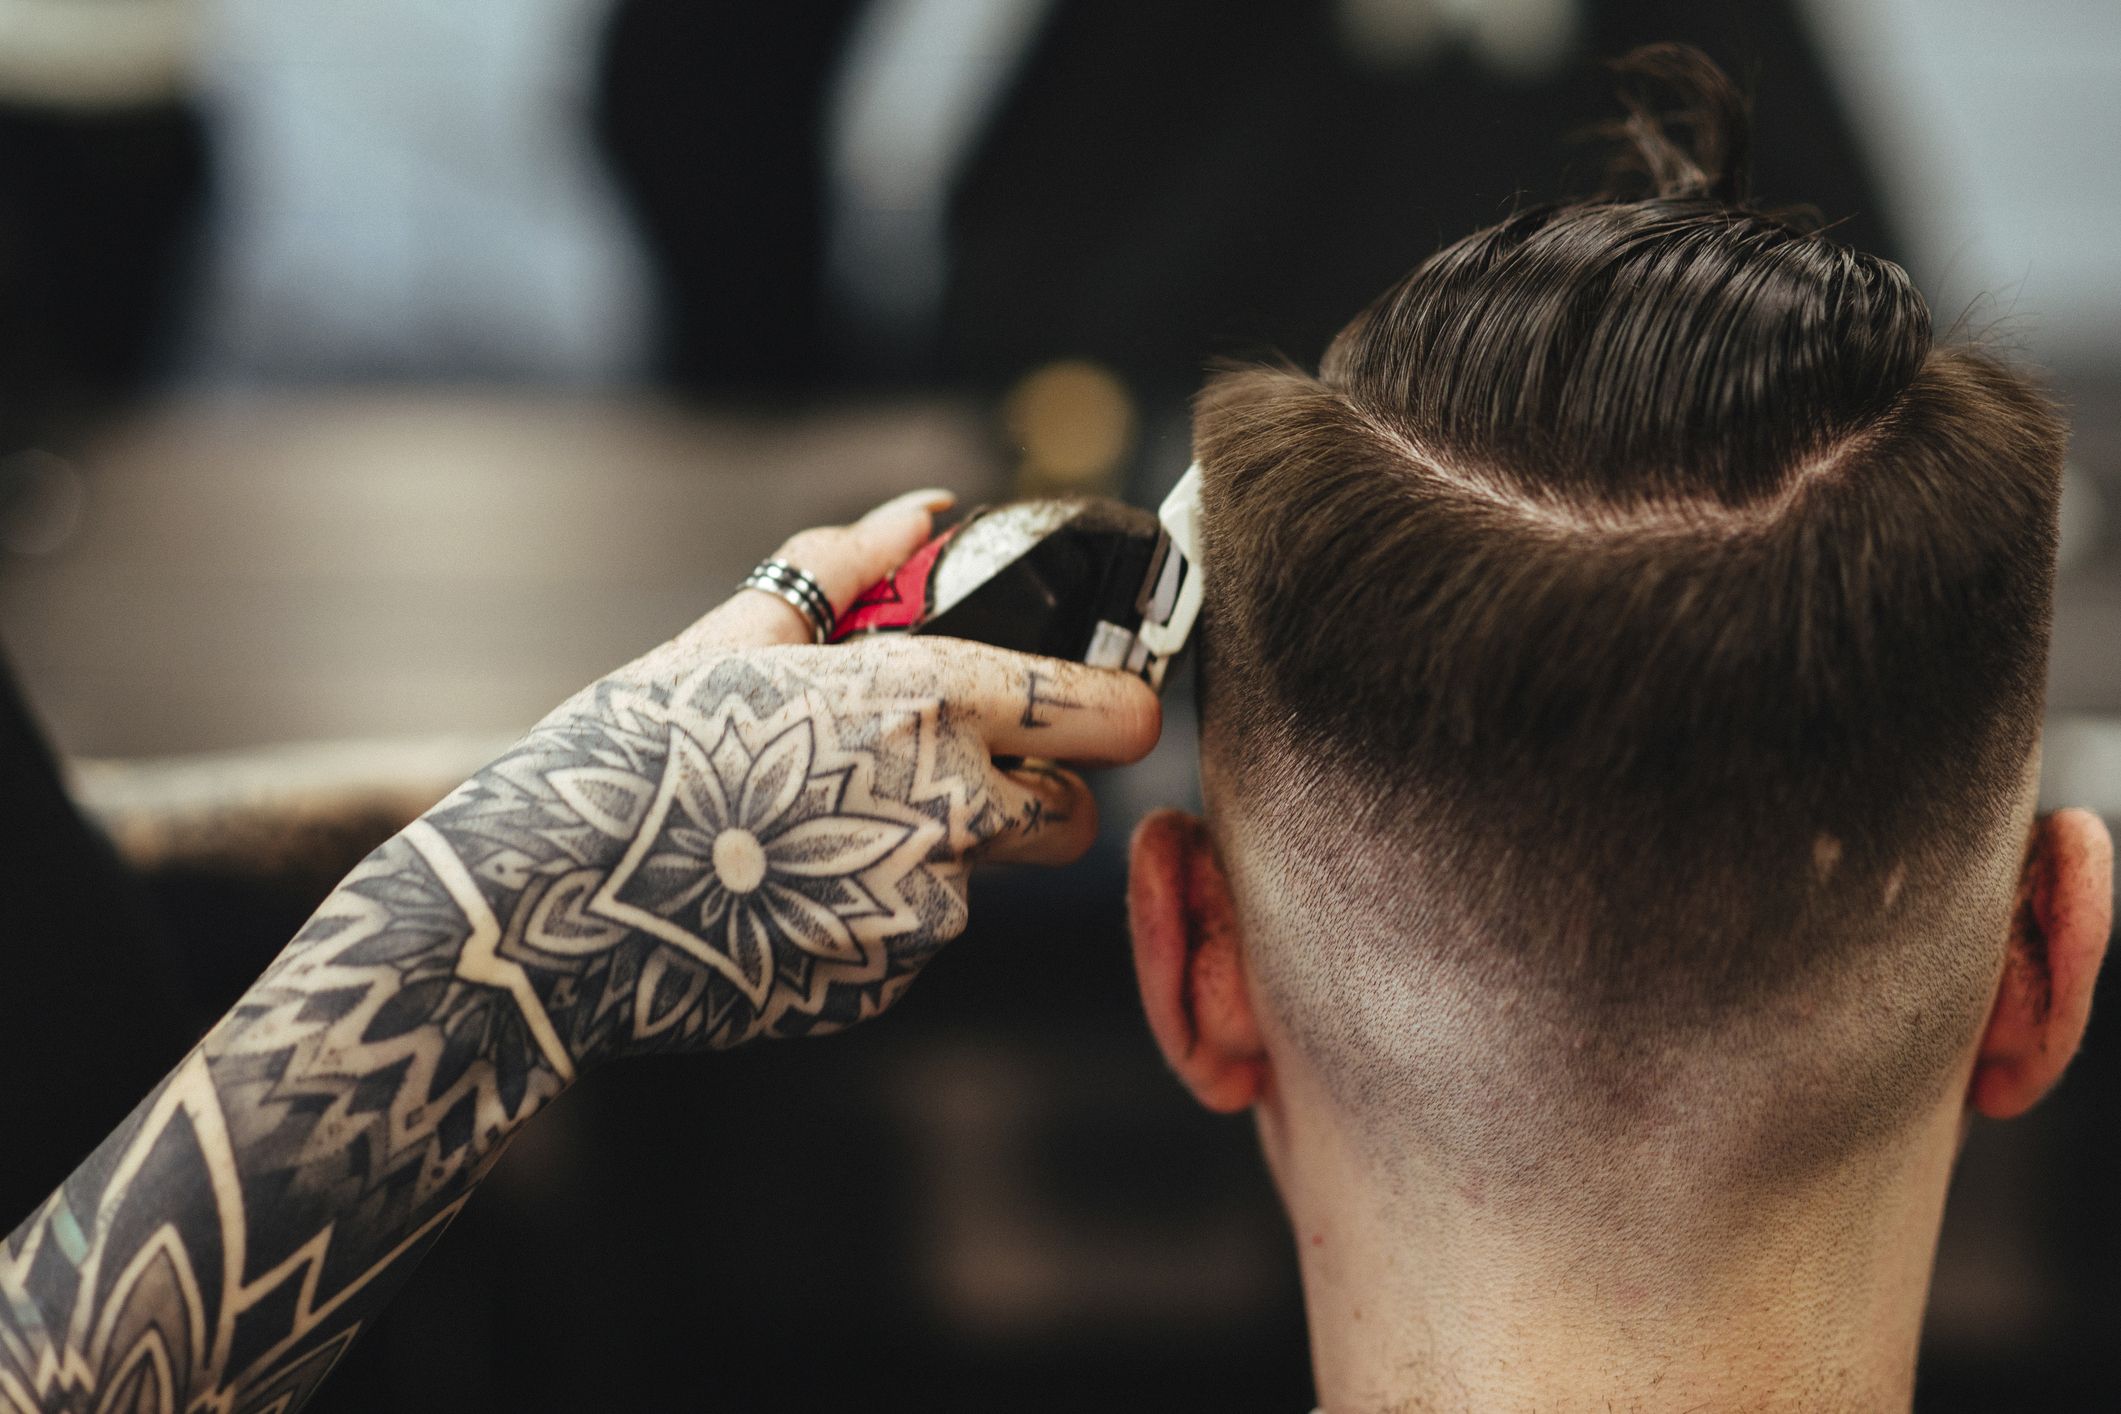 best clippers for undercut